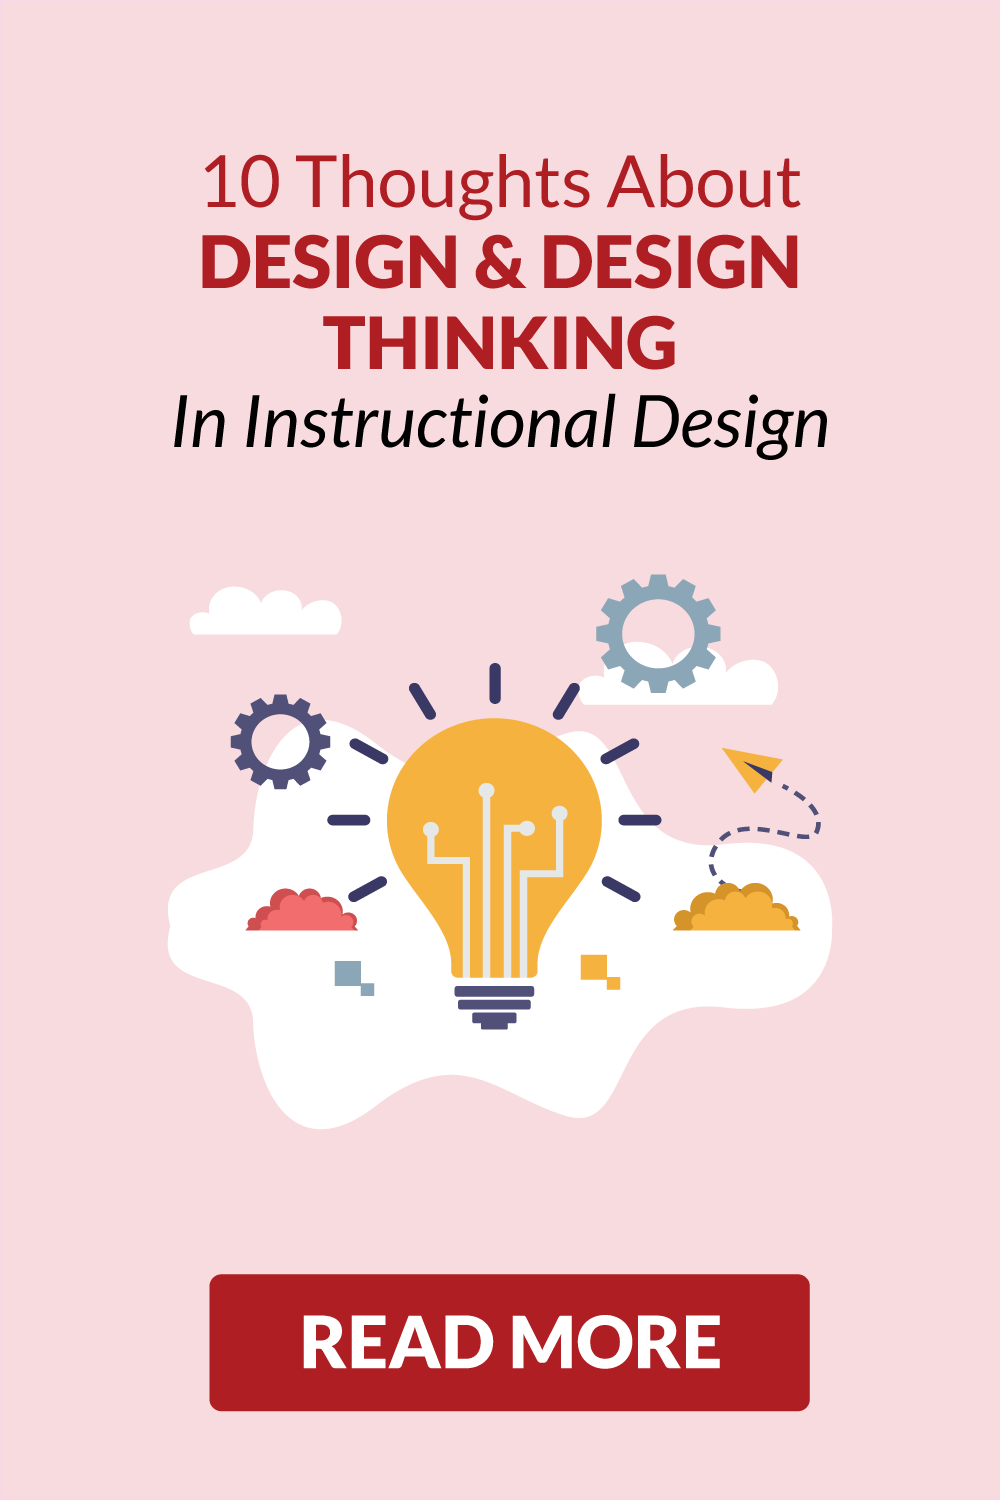 10 Thoughts About Design and Design Thinking in Instructional Design